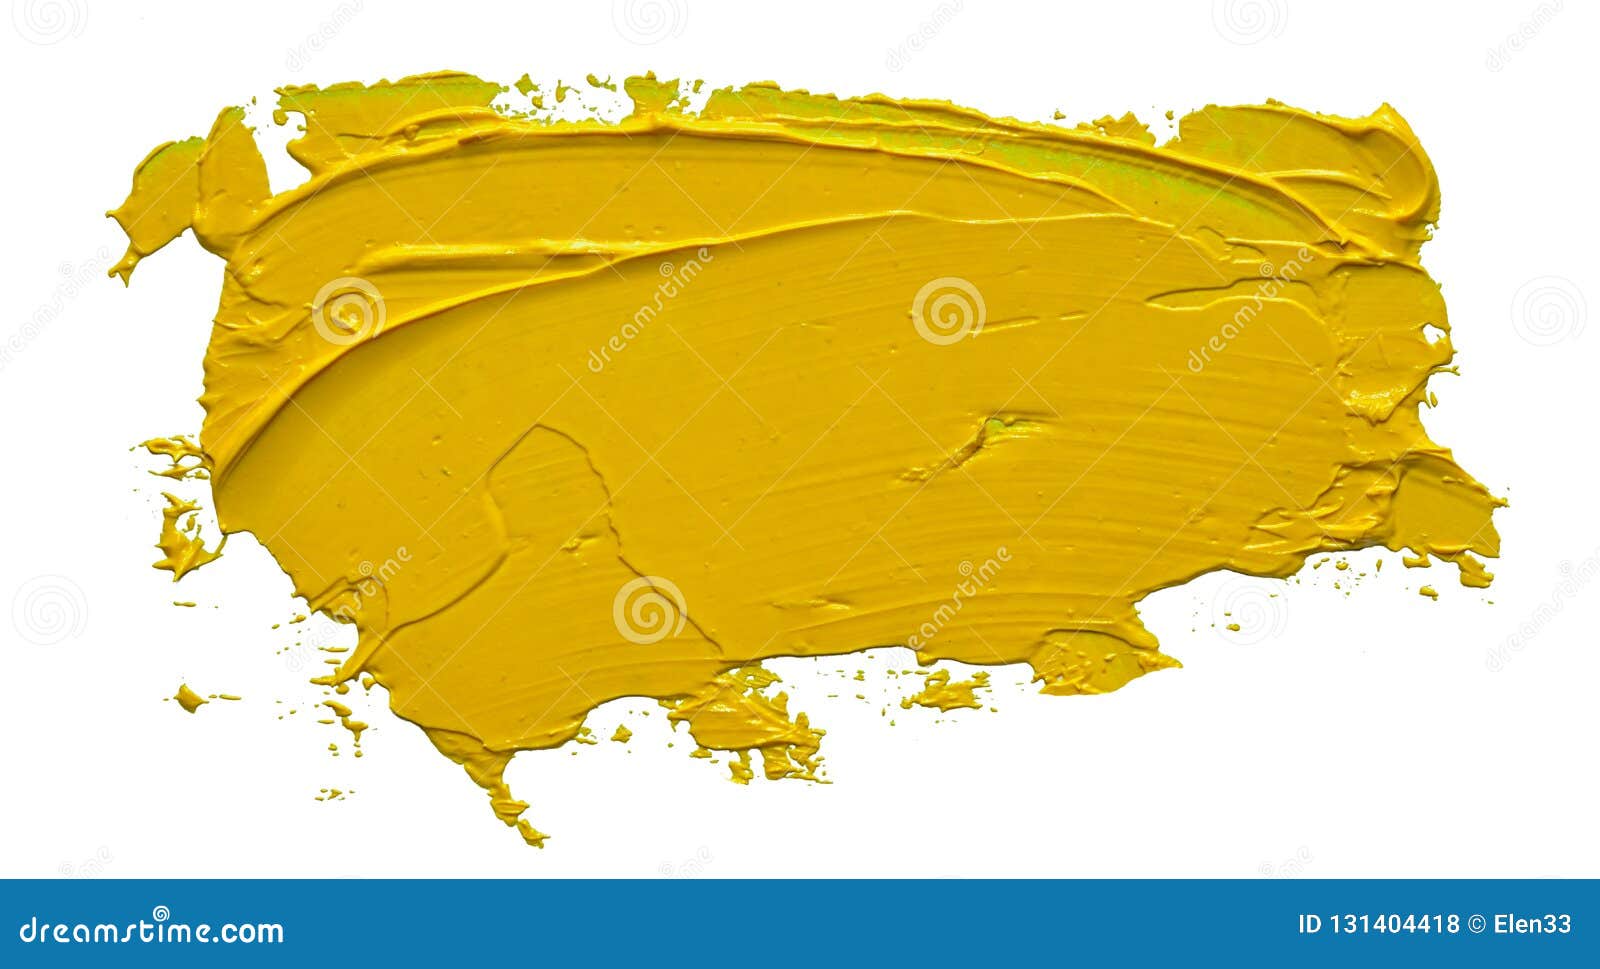 Textured Yellow Oil Paint Brush Stroke Isolated On White Background Stock  Photo - Download Image Now - iStock